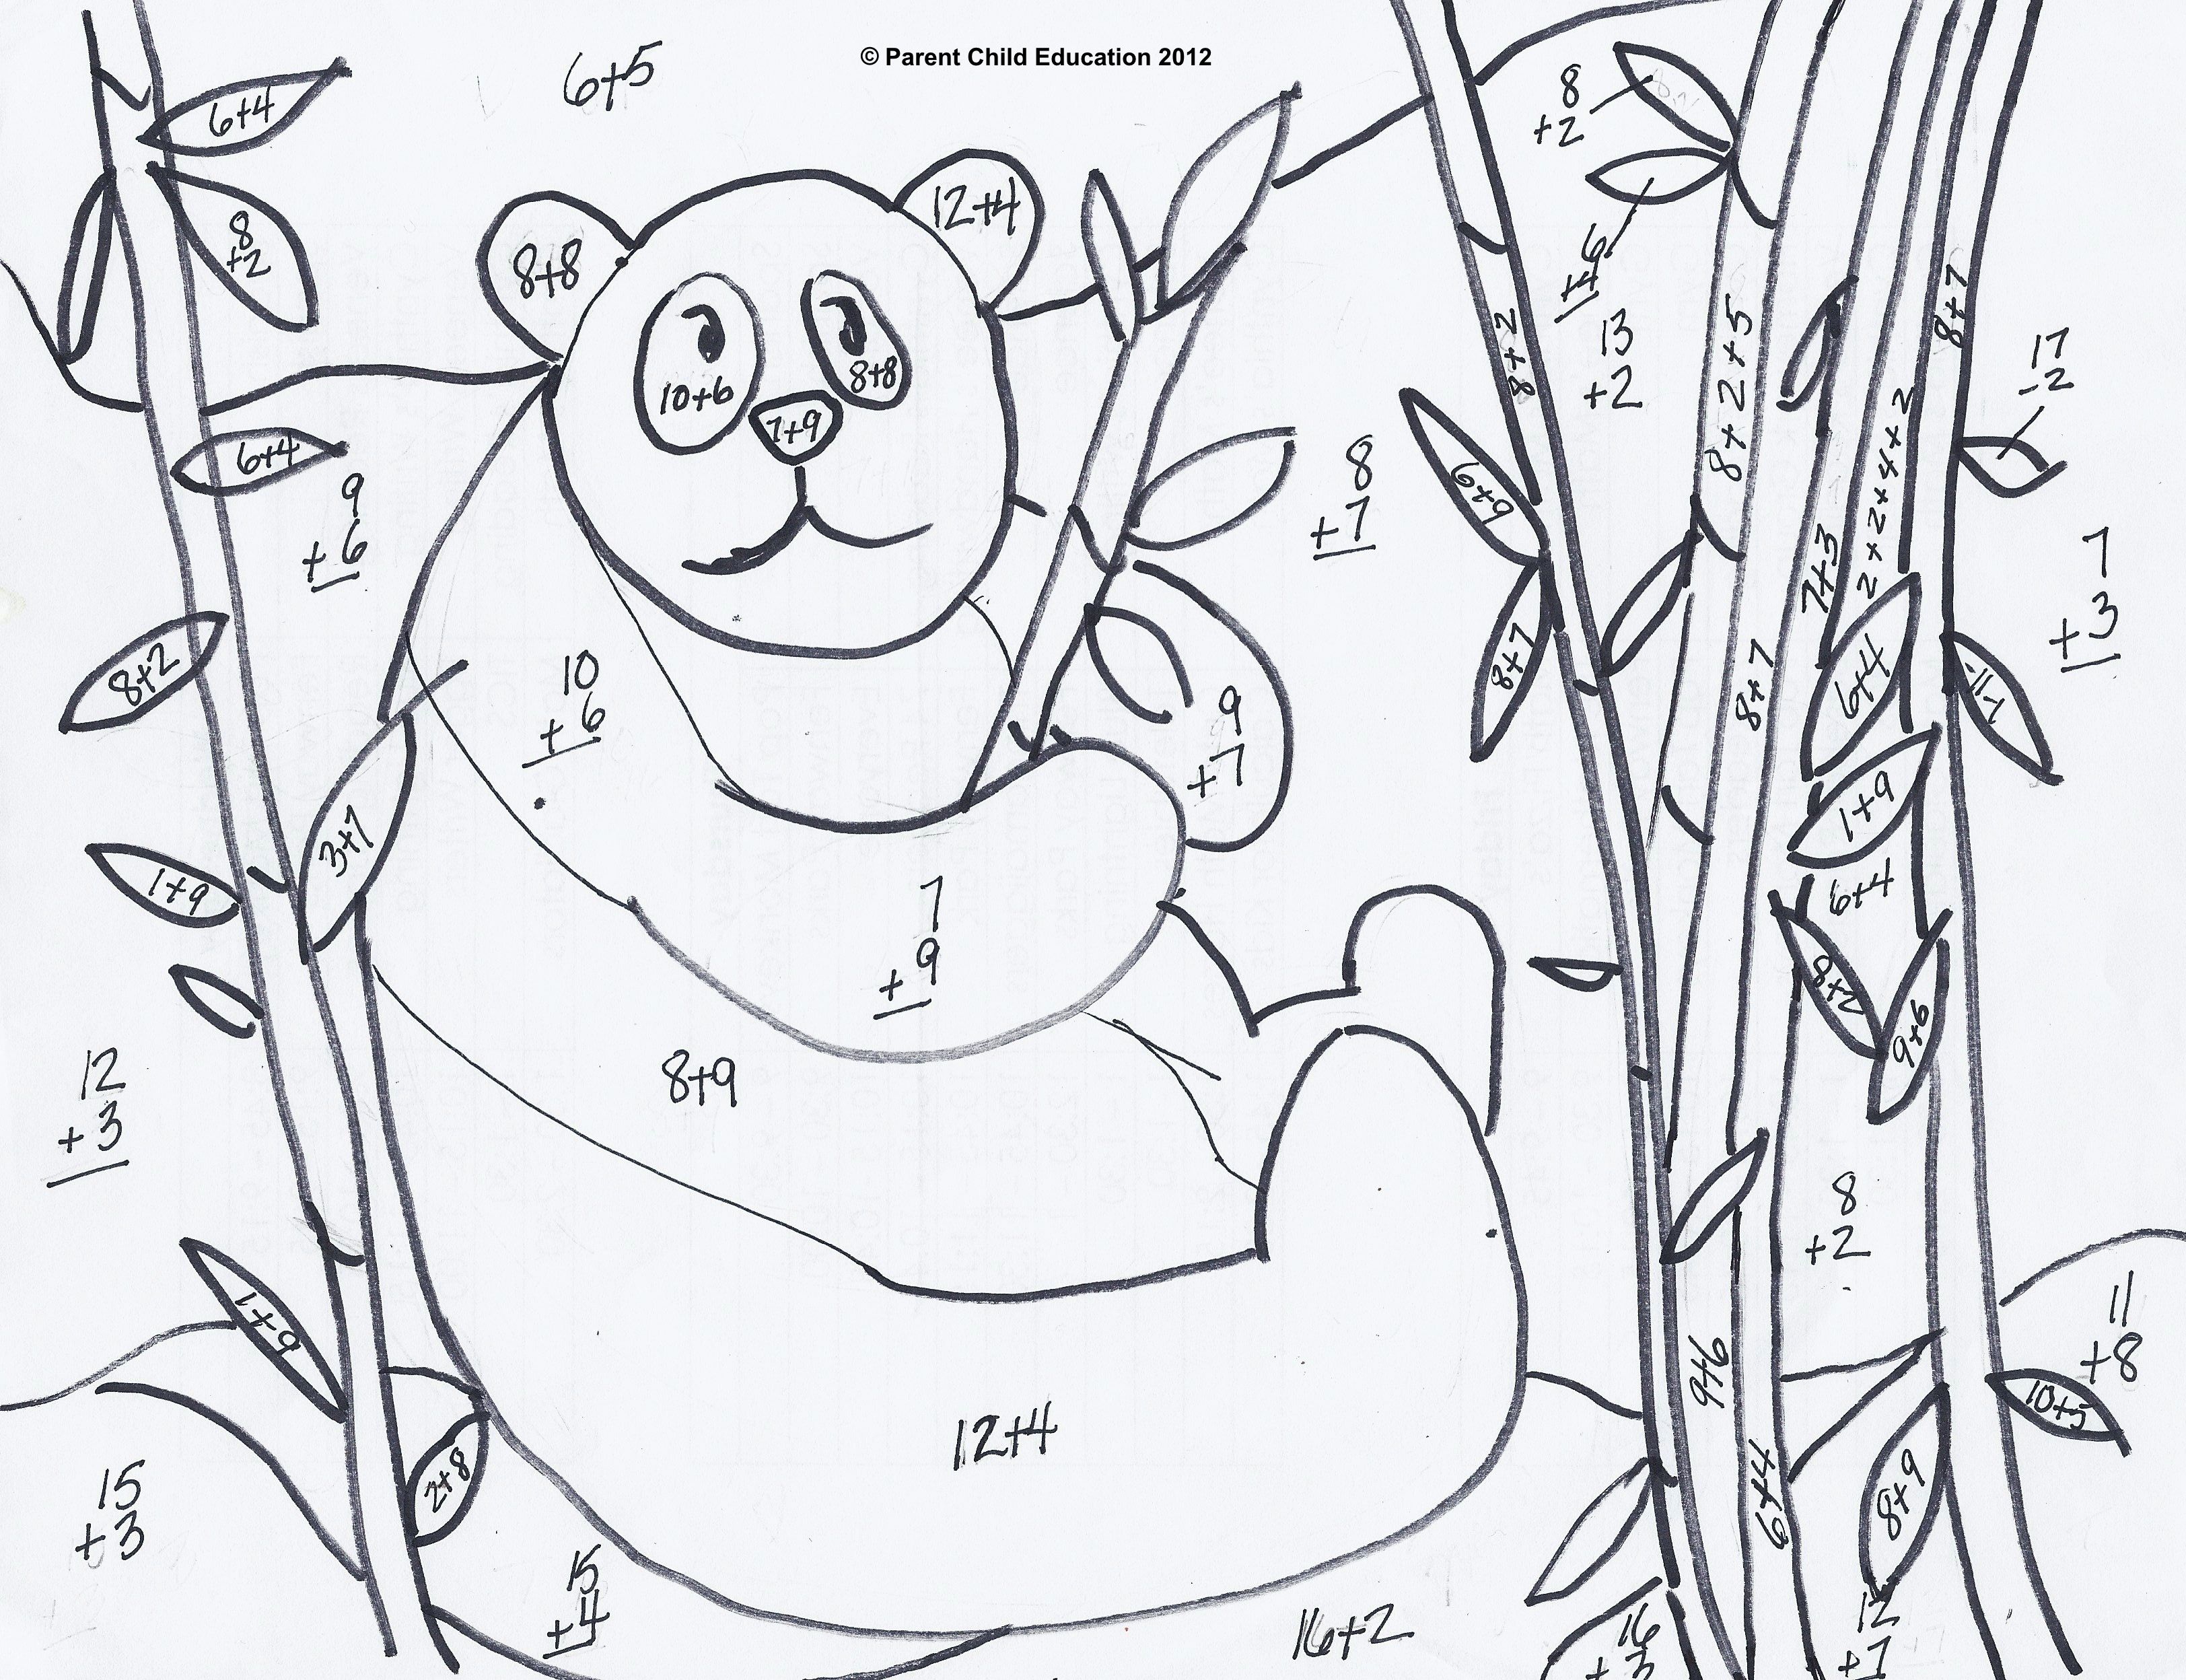 Addition And Subtraction Coloring Pages - Coloring Home